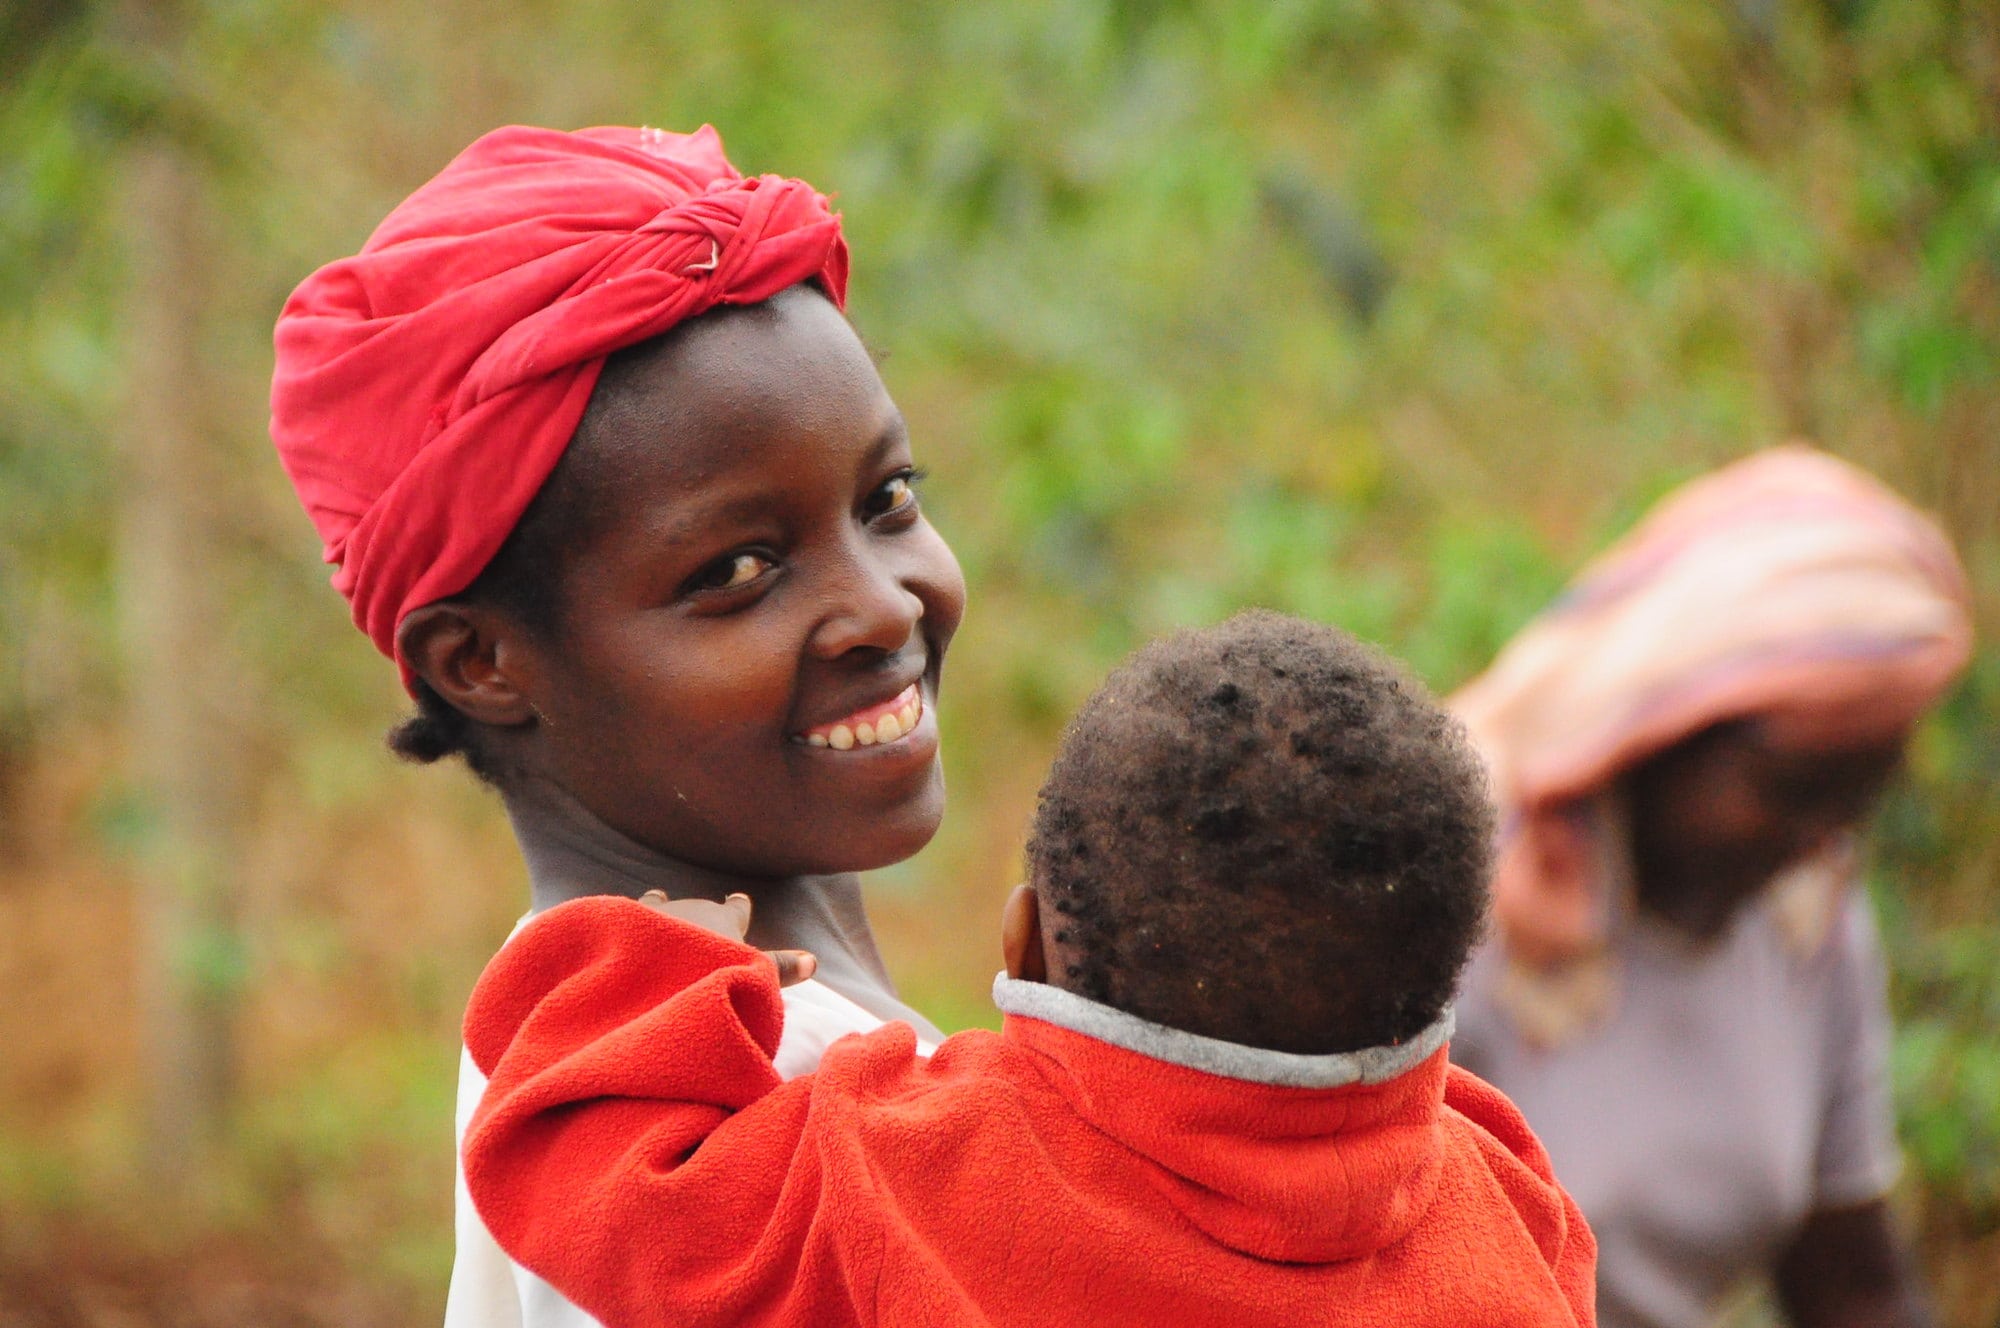 Woman with child in Kenya.